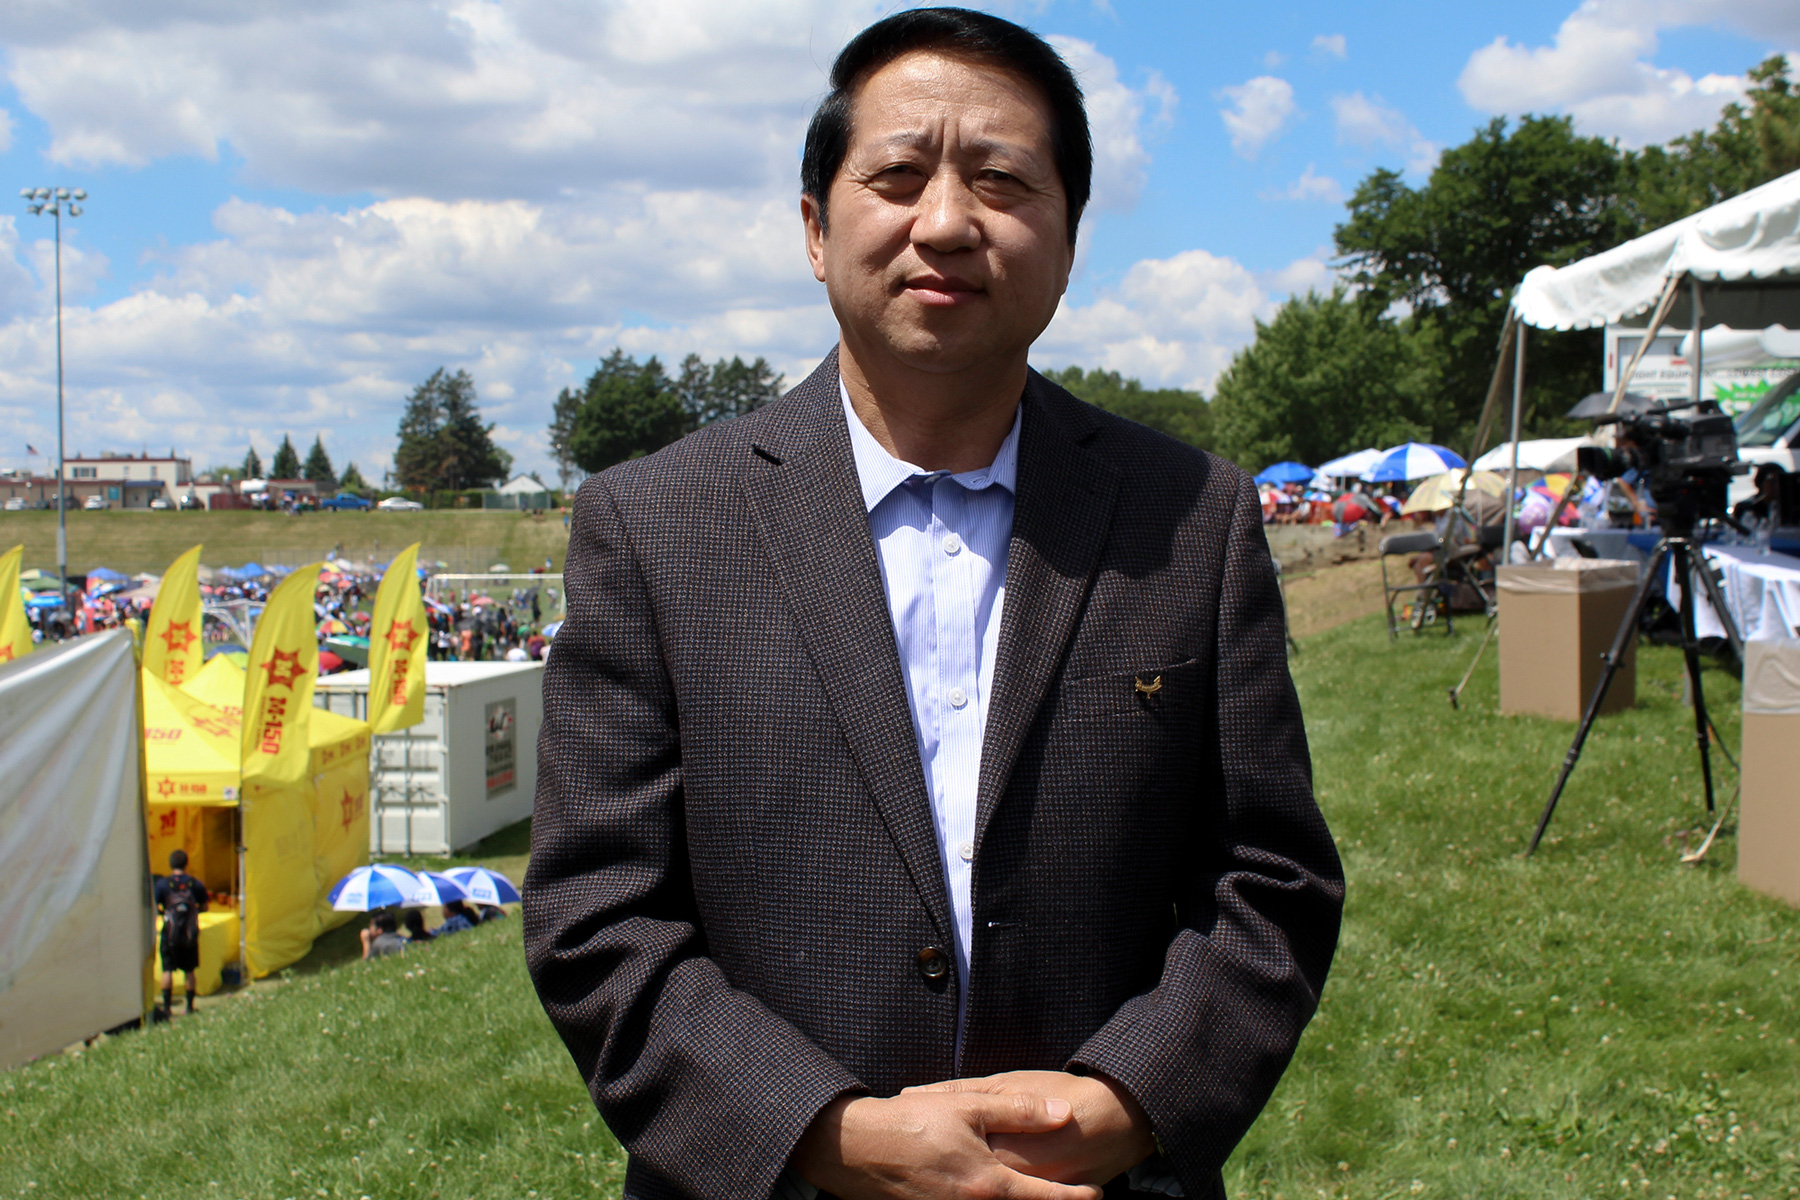 Wahoua Vue, president of the Hmong 18 Council Inc., stands outside of the Hmong festival in St. Paul, Minnesota. The council began as a nonprofit group focused on community culture, but it also is educating Hmong people about voting. (Phillip Jackson/News21)